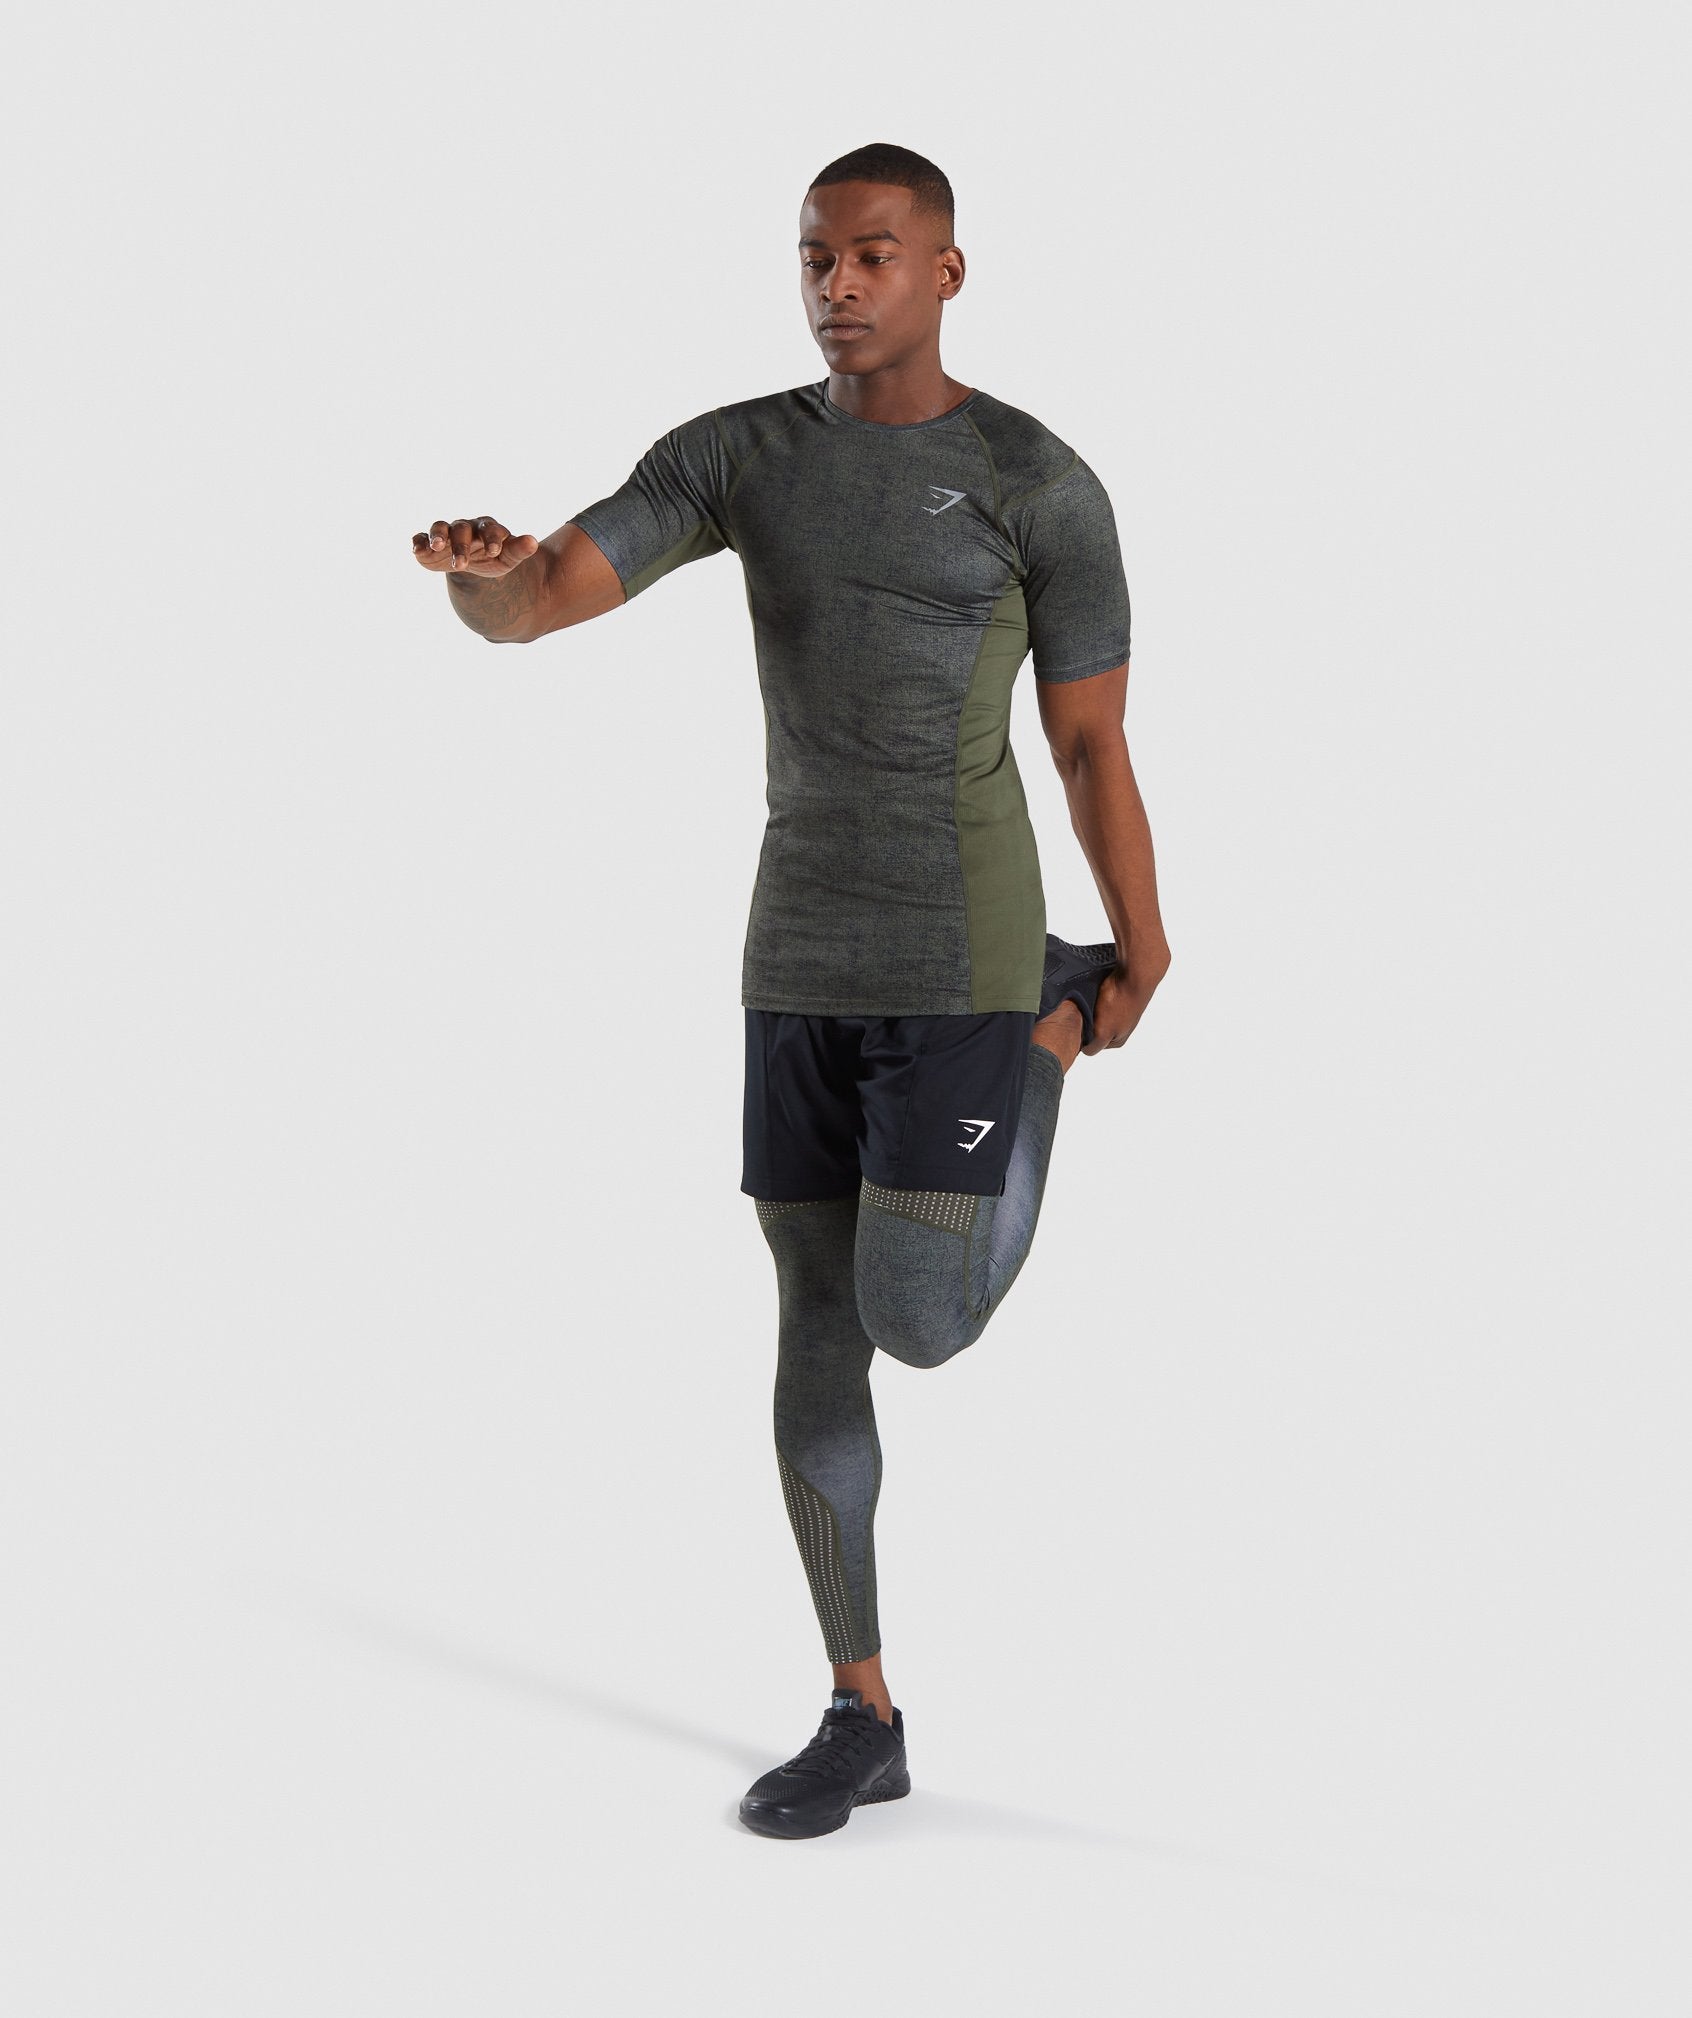 Hybrid Baselayer Top in Woodland Green Marl - view 3